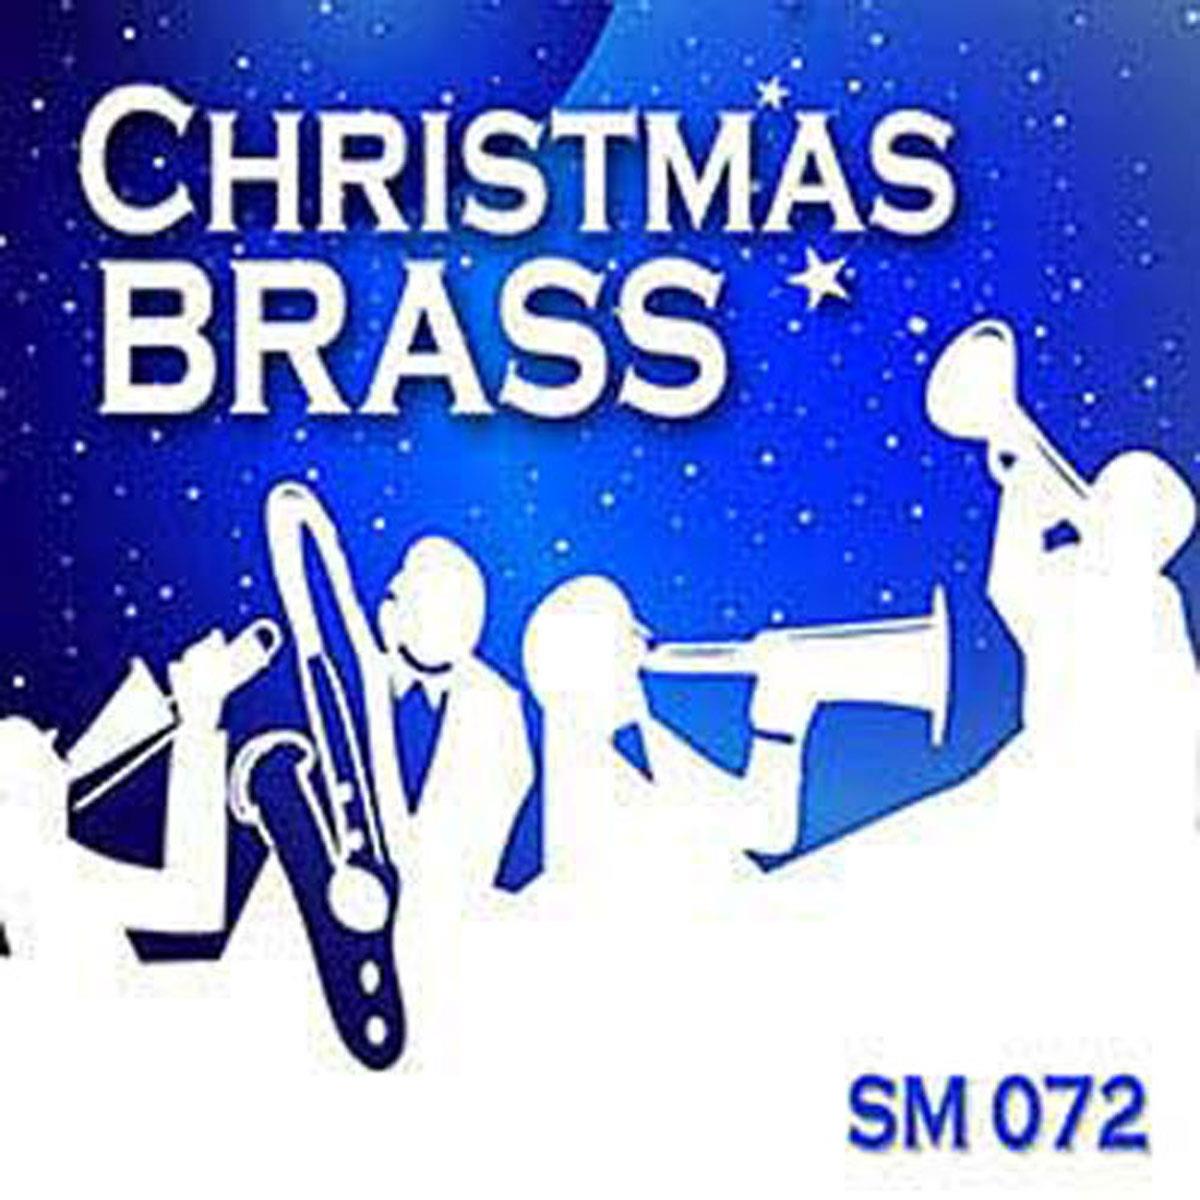 Image of Sound Ideas Royalty Free Music Christmas Brass Software